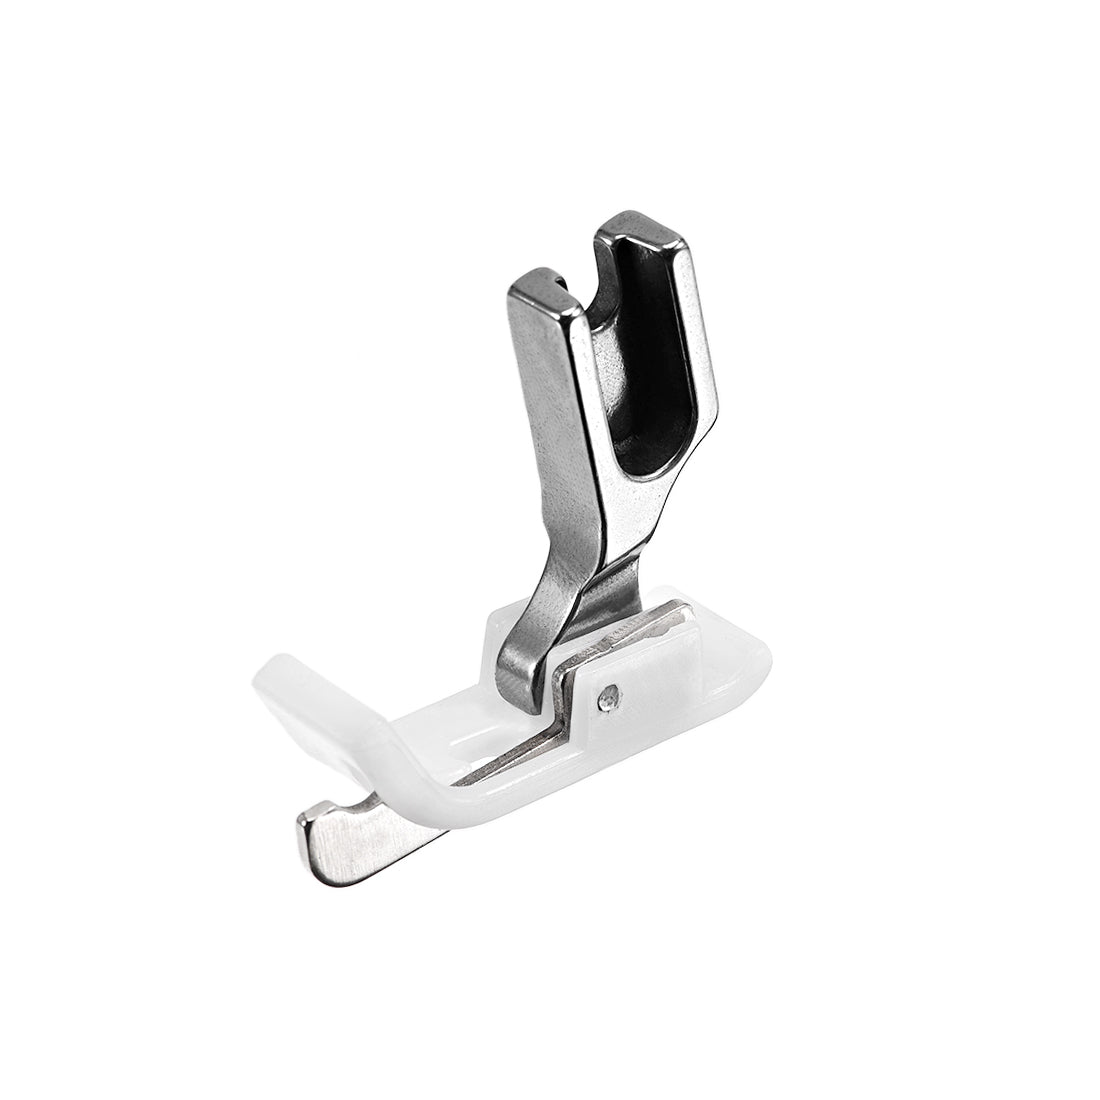 uxcell Uxcell #SP-18 Industrial Sewing Machine Hinged Presser Foot with Right Guide 1/32" (1mm) White